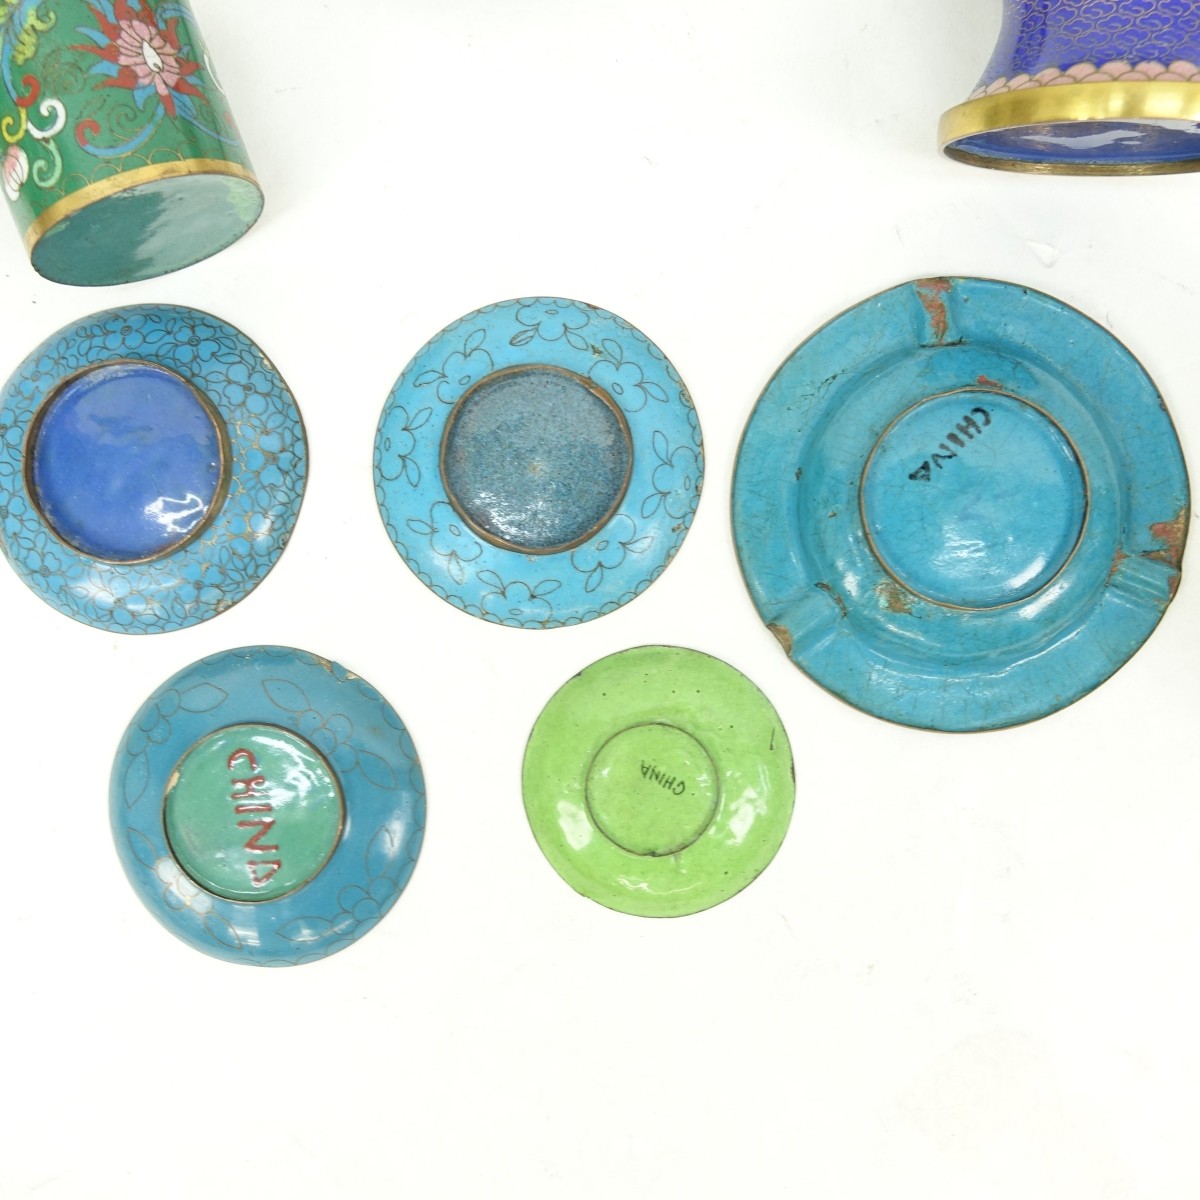 11 pc Chinese Cloisonne Tableware